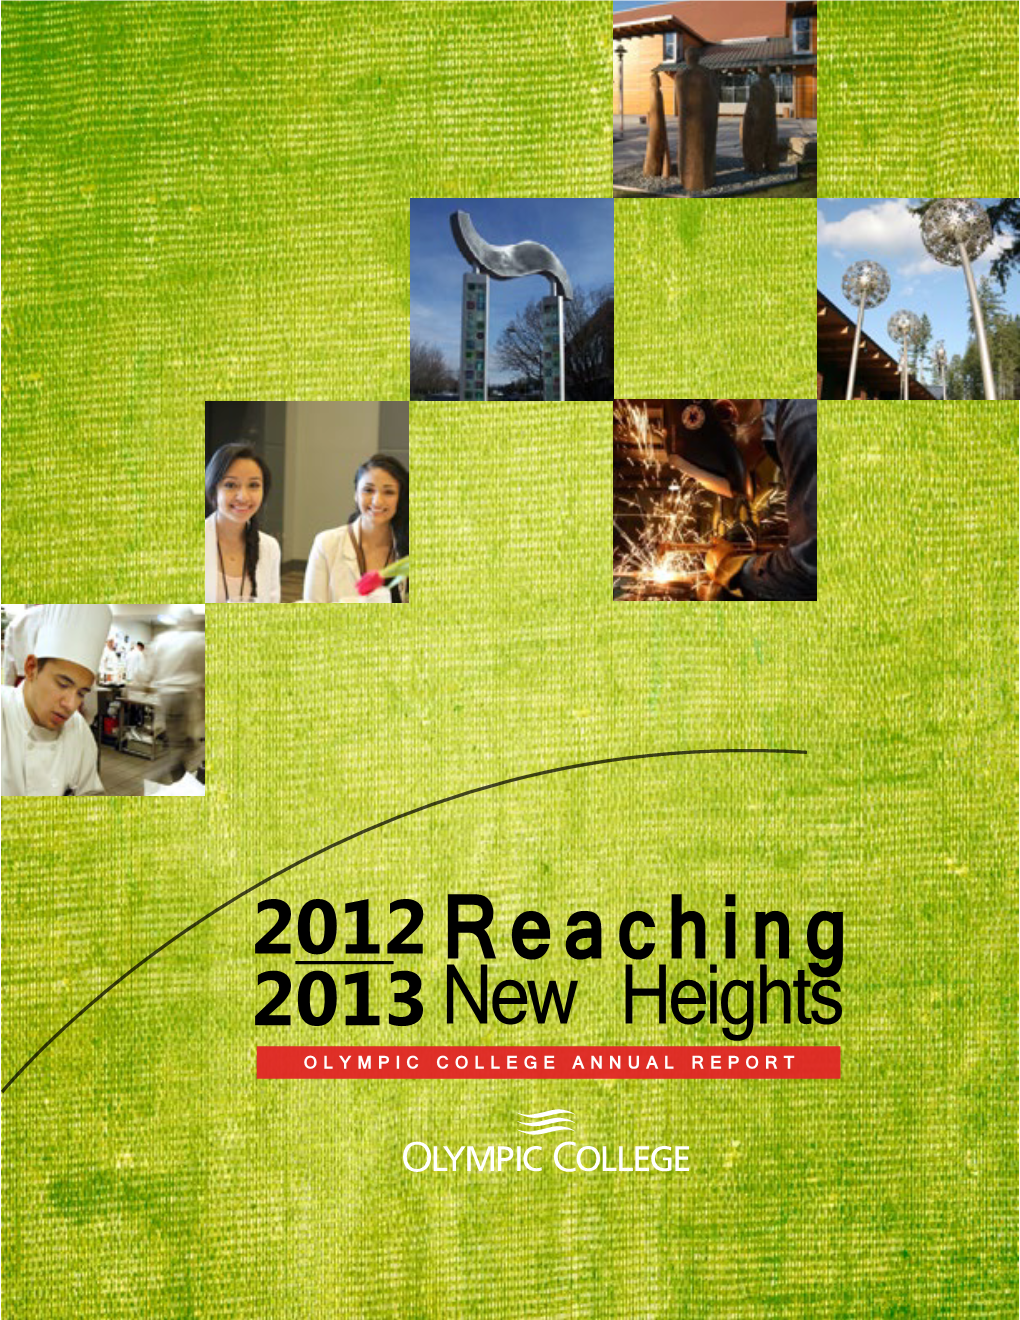 Reaching 2013 New Heights OLYMPIC COLLEGE ANNUAL REPORT 02